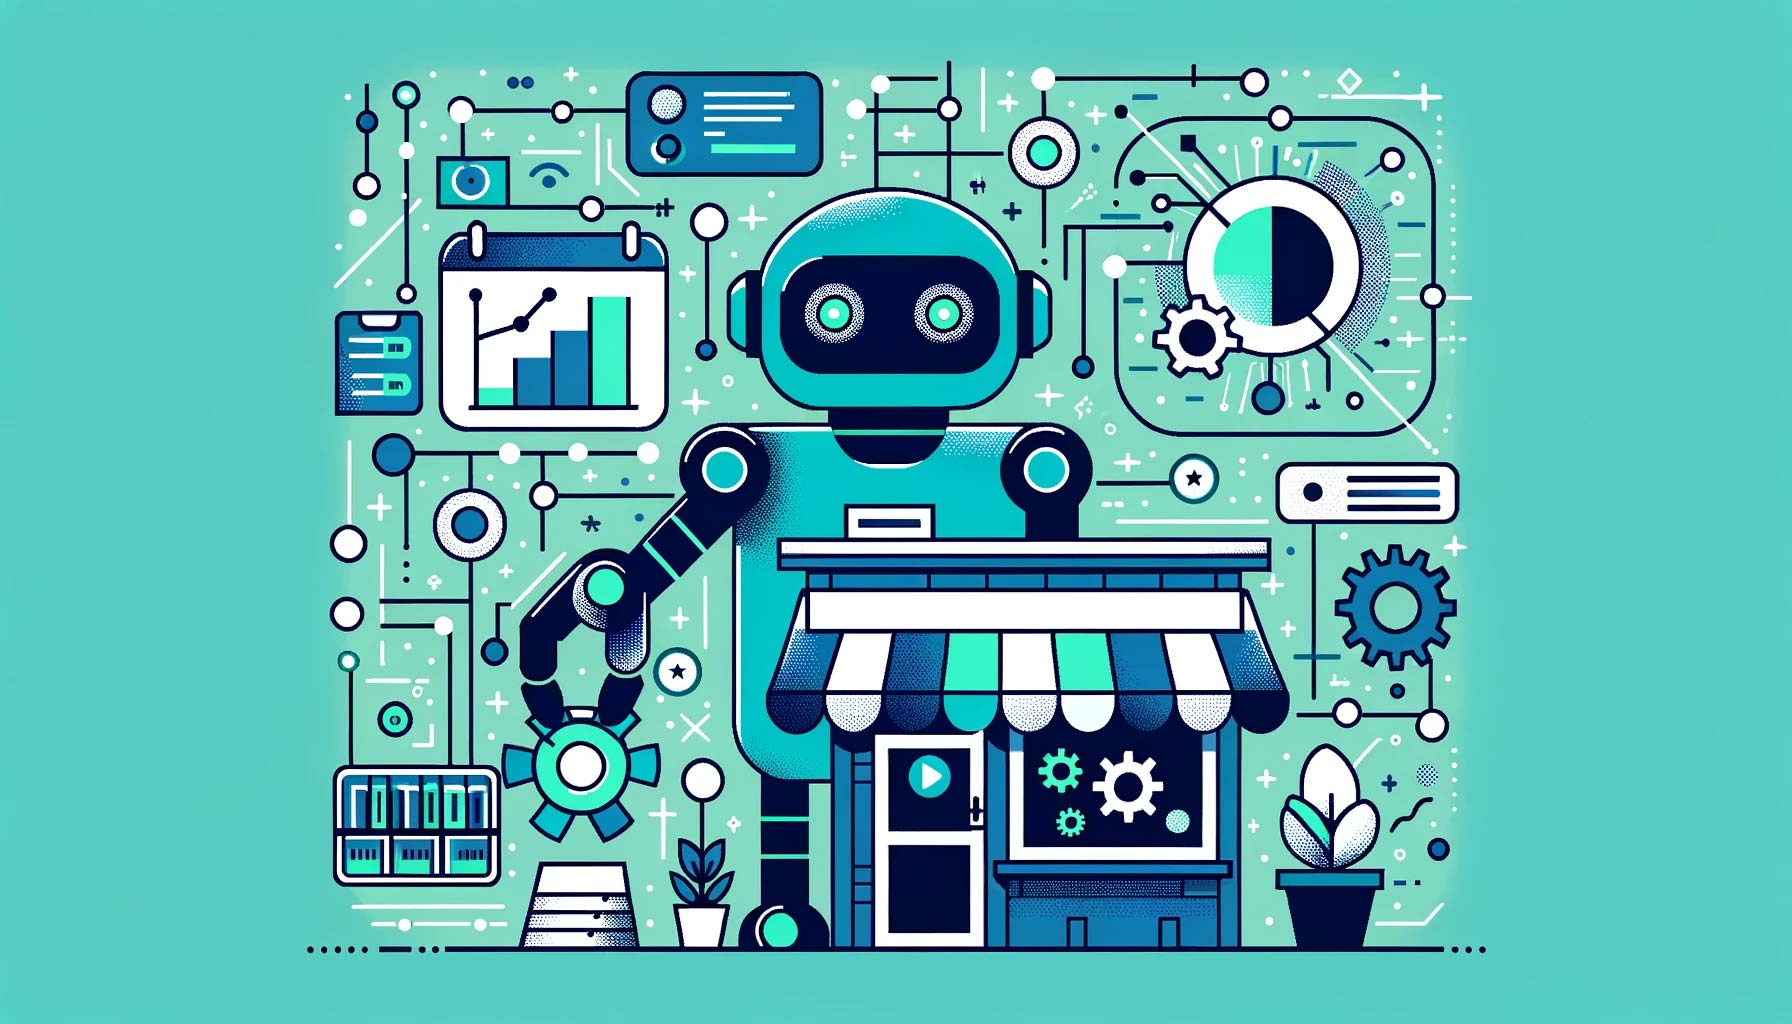 Illustration with a prominent use of a blue-toned green background. It showcases a stylized AI robot and a small business storefront. The robot is assisting the business by offering digital tools like charts, data, and gears. The design elements like interconnected dots and geometric shapes also utilize the green shade, emphasizing the interconnectedness of technology and business.